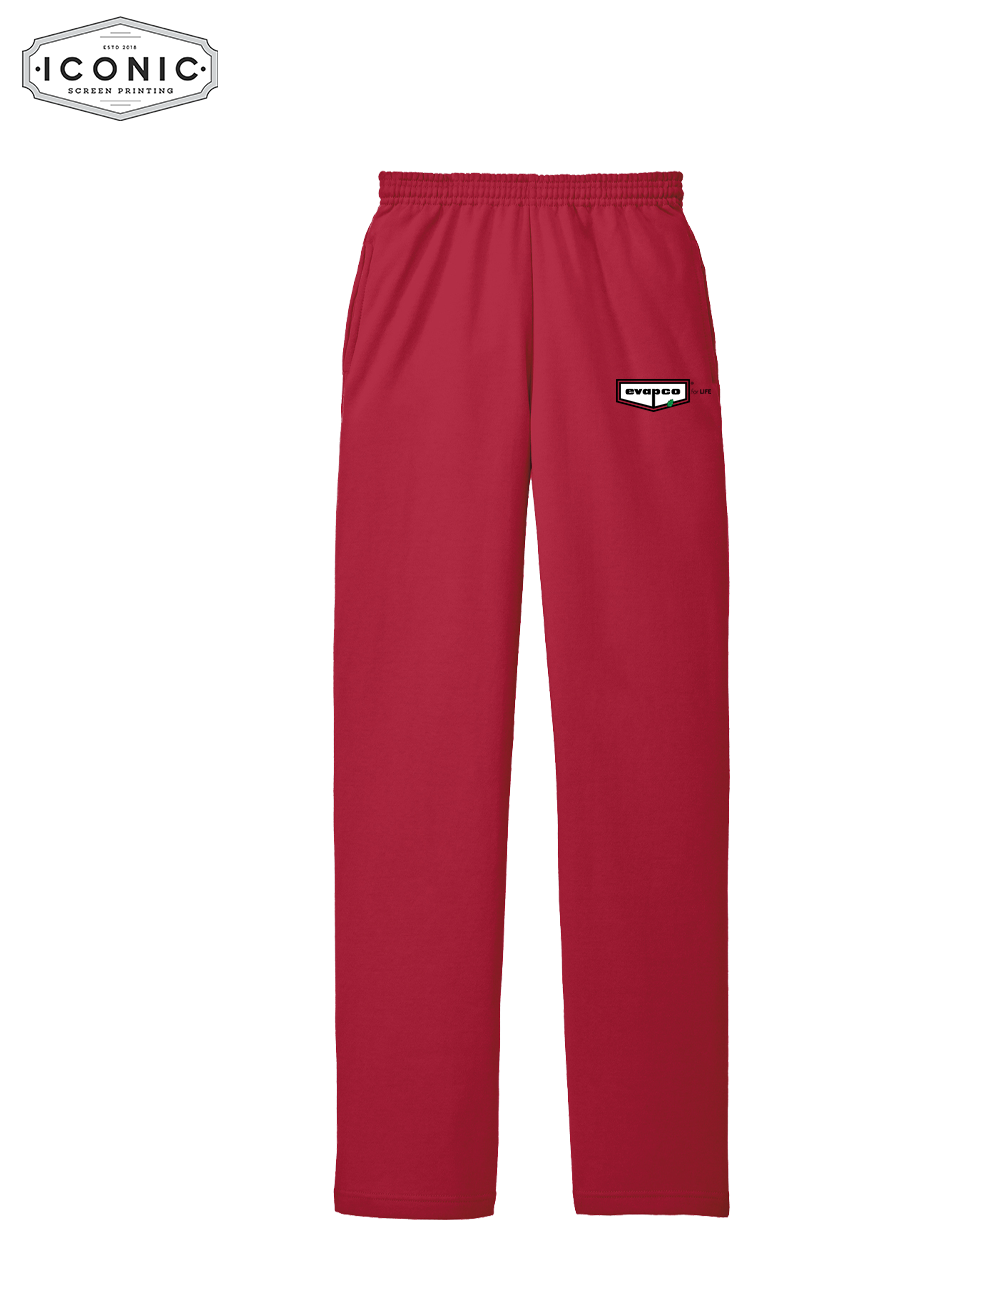 Evapco for Life - Core Fleece Sweatpant with Pockets - Embroidery